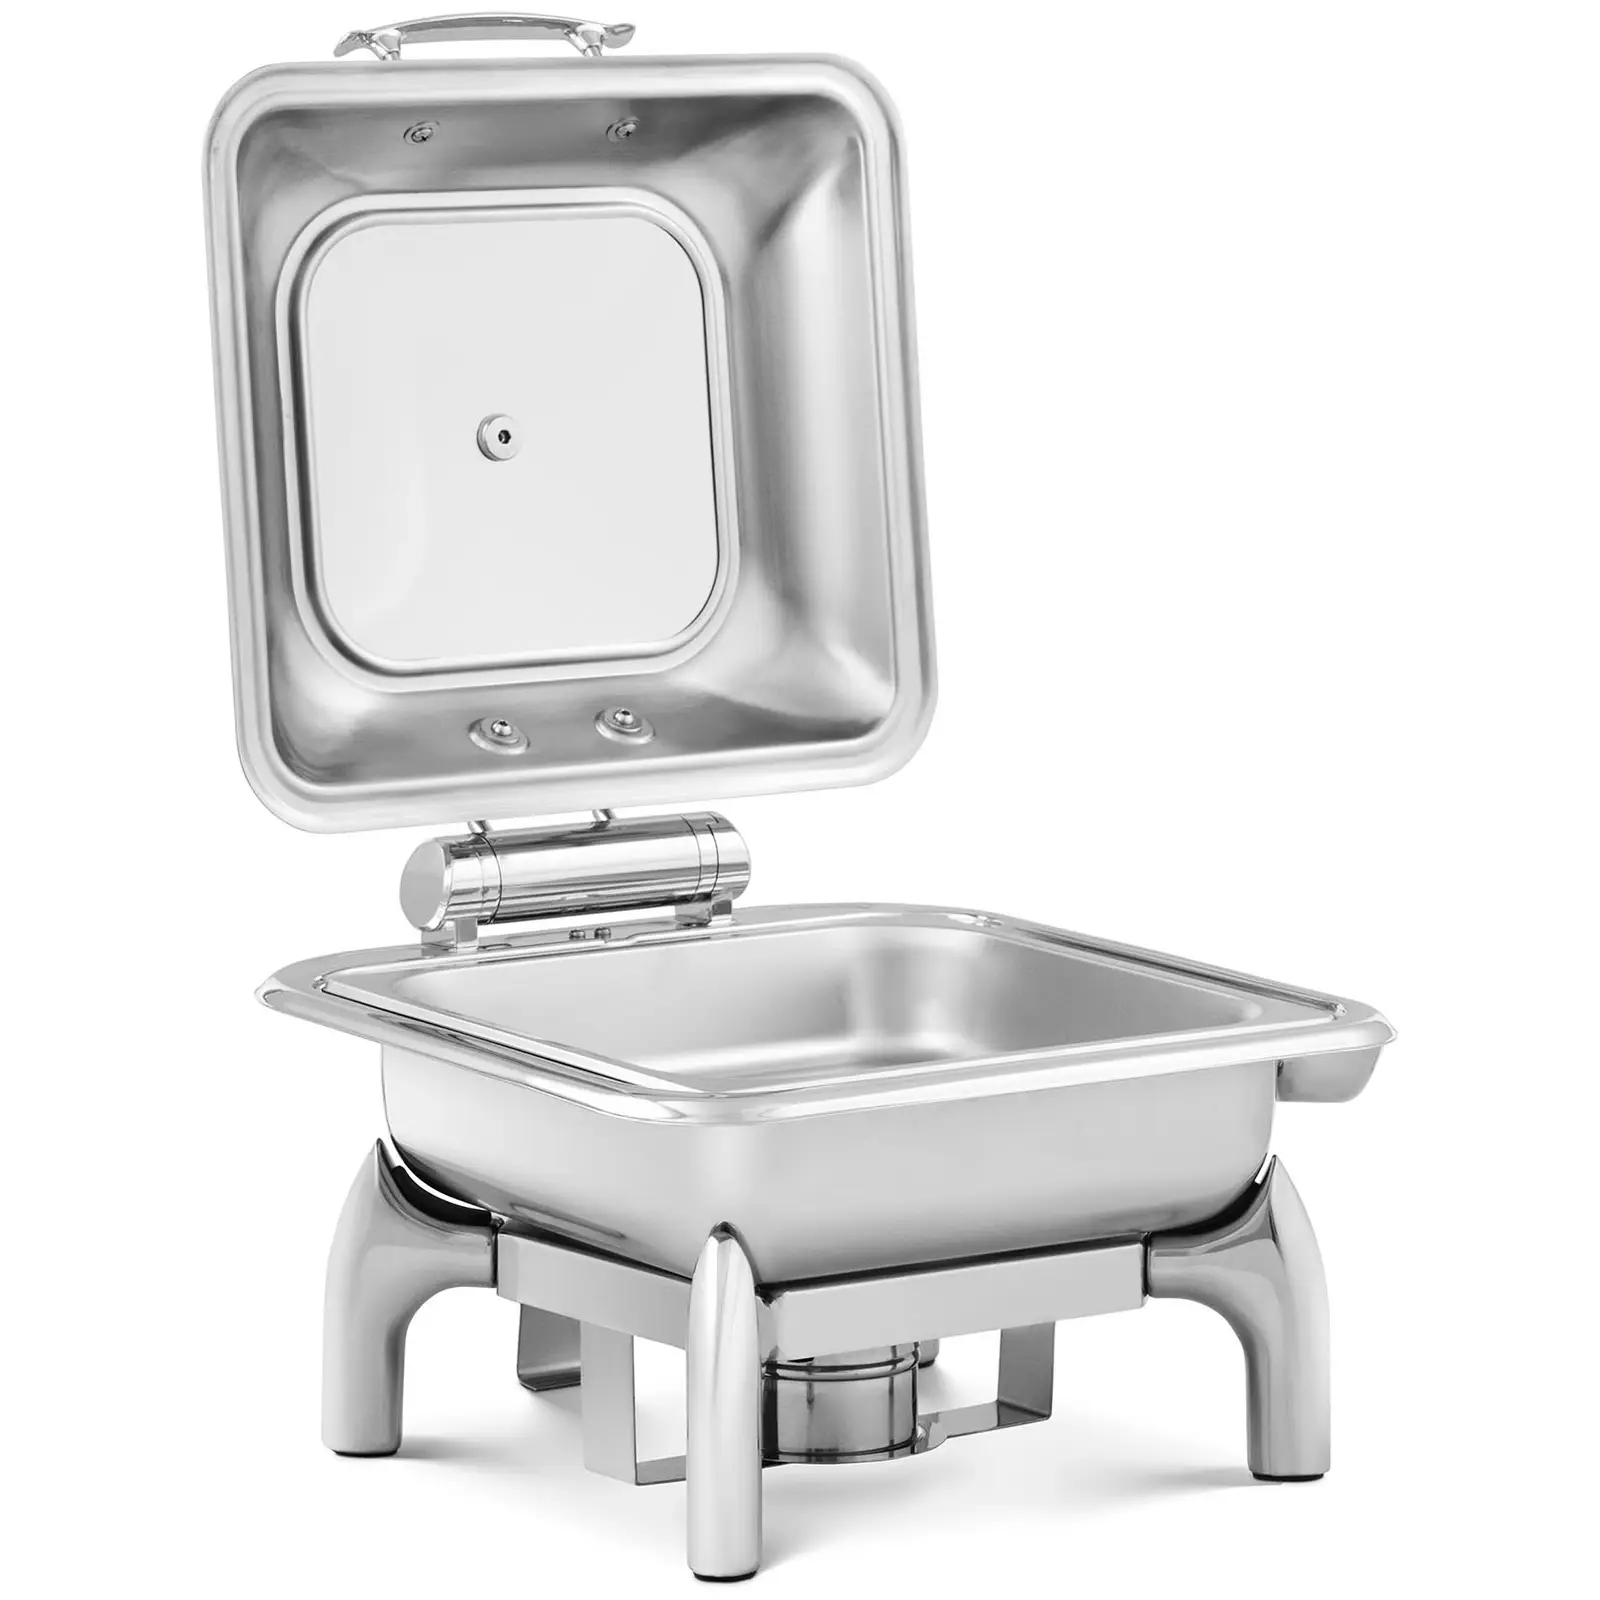 Chafing Dish - GN 2/3 - Royal Catering - 5,3 L - 1 contenedores de combustible